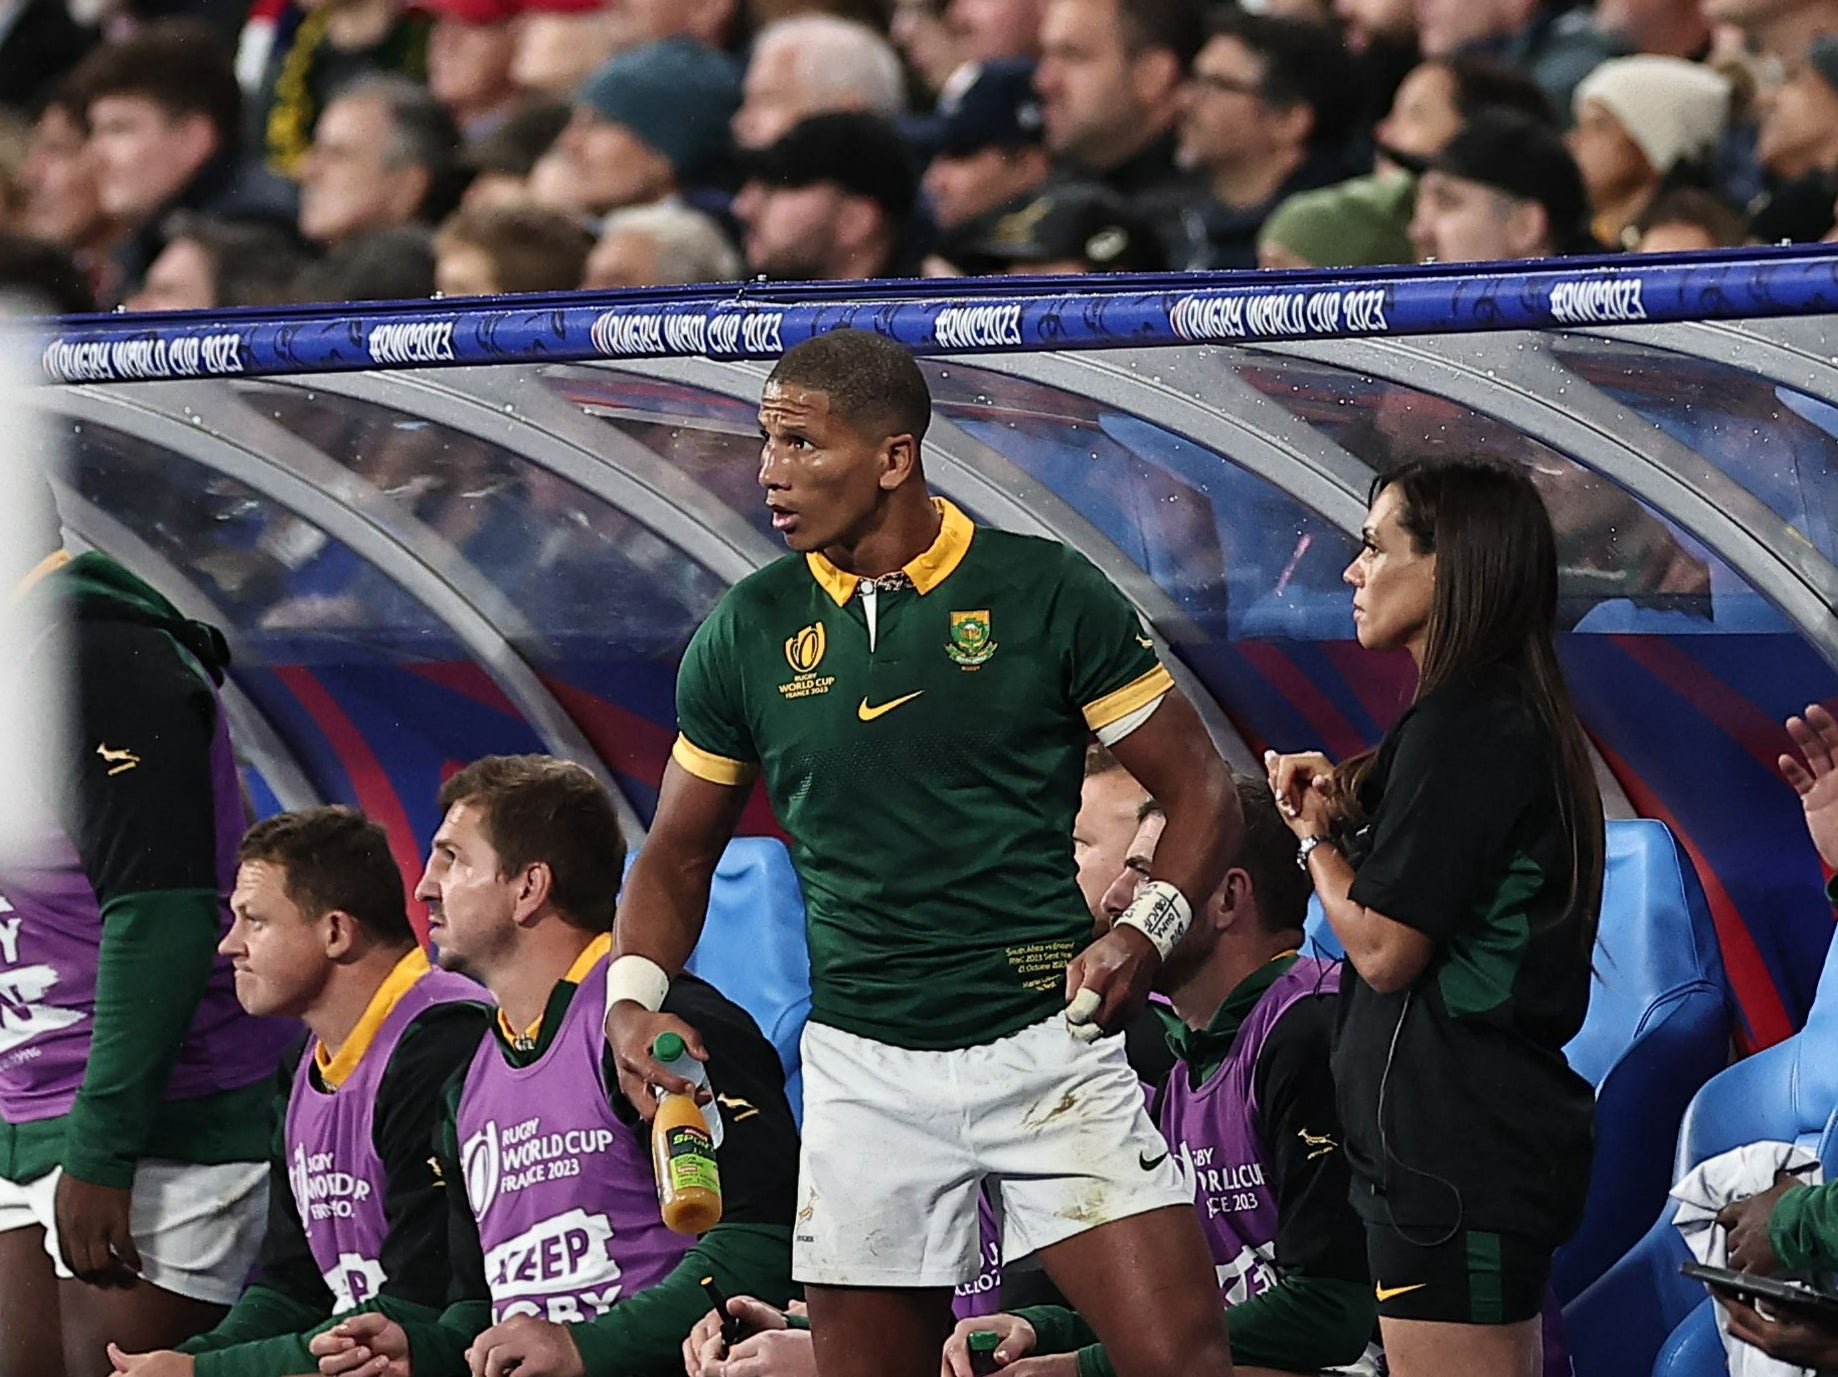 Libbok (C) is seen on the bench after he was substituted